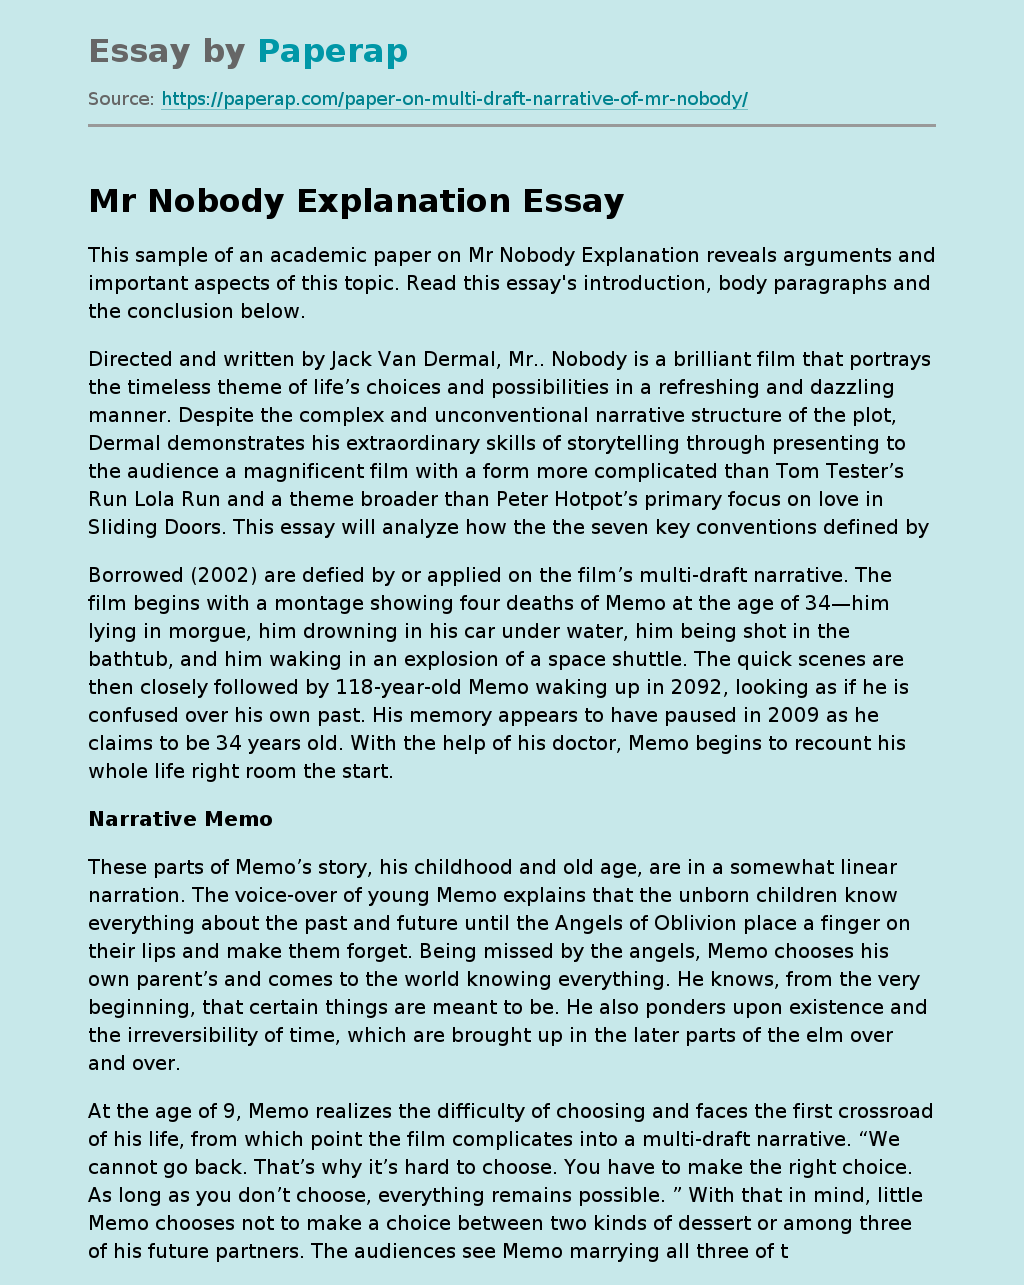 Sample of an Academic Paper on Mr Nobody Explanation